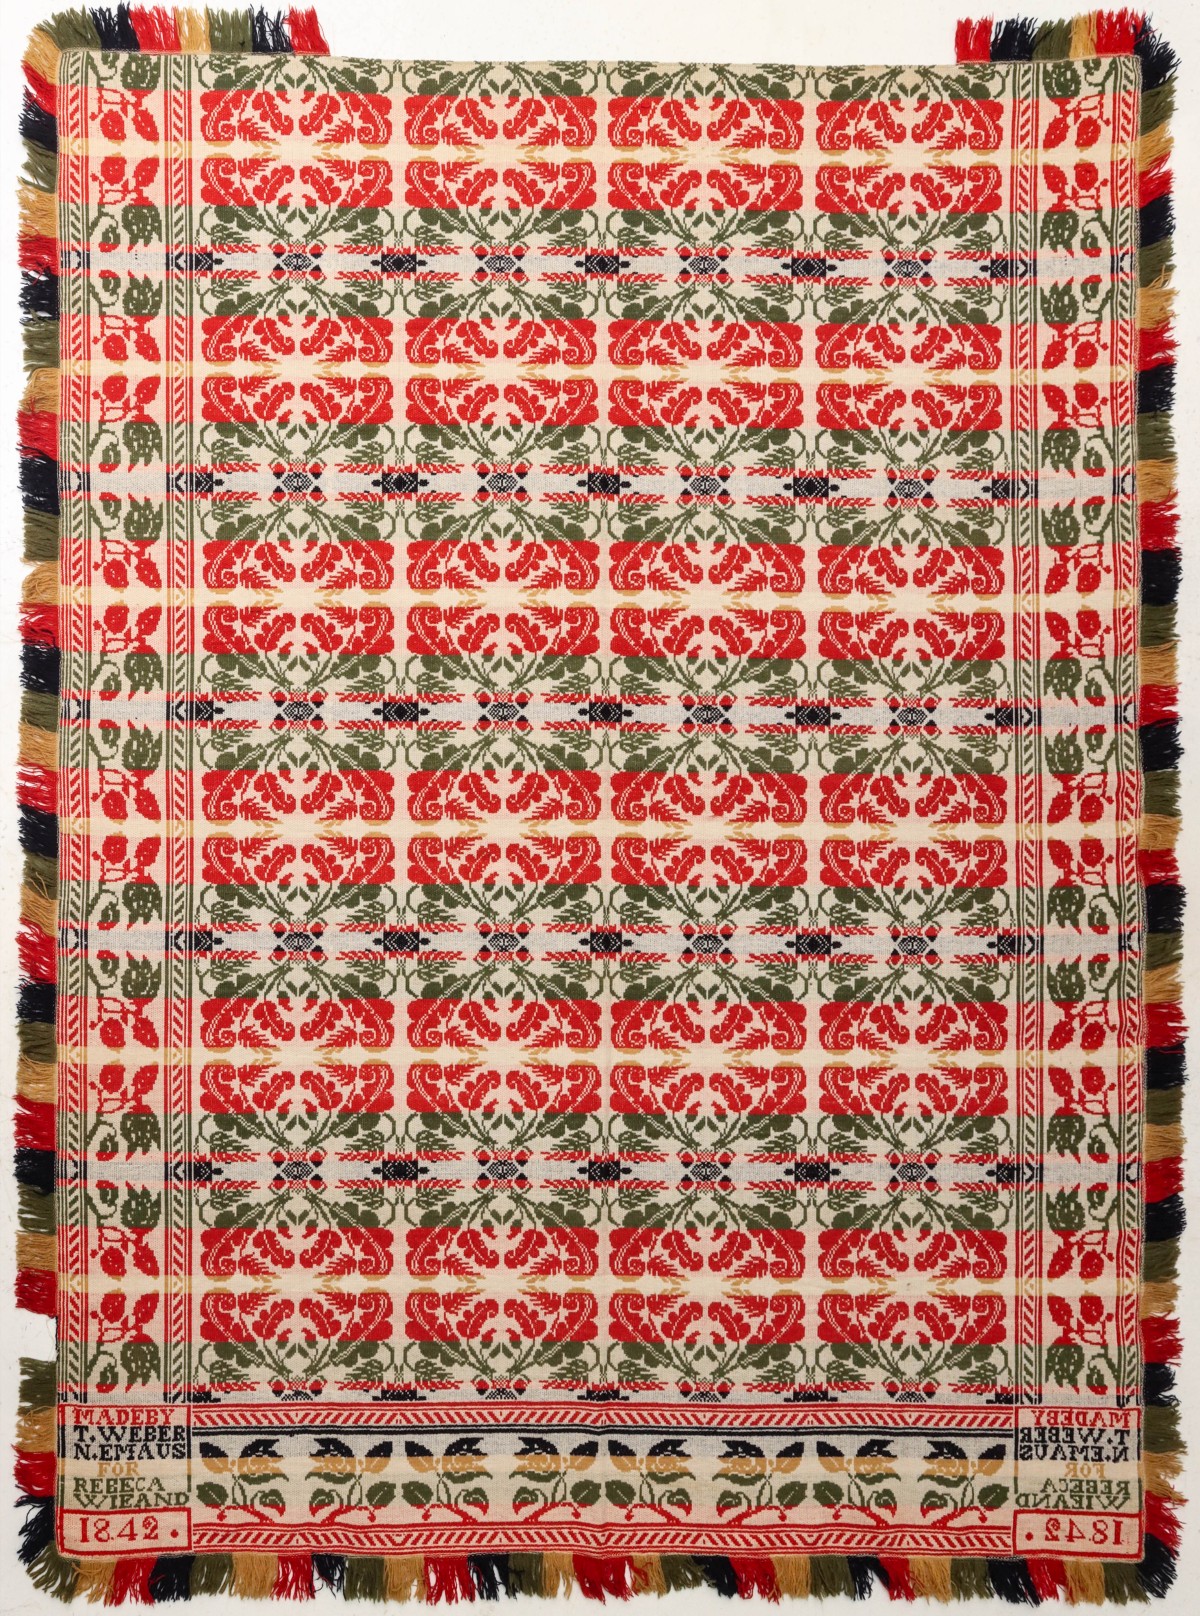 A WOVEN JACQUARD COVERLET SIGNED AND DATED 1842